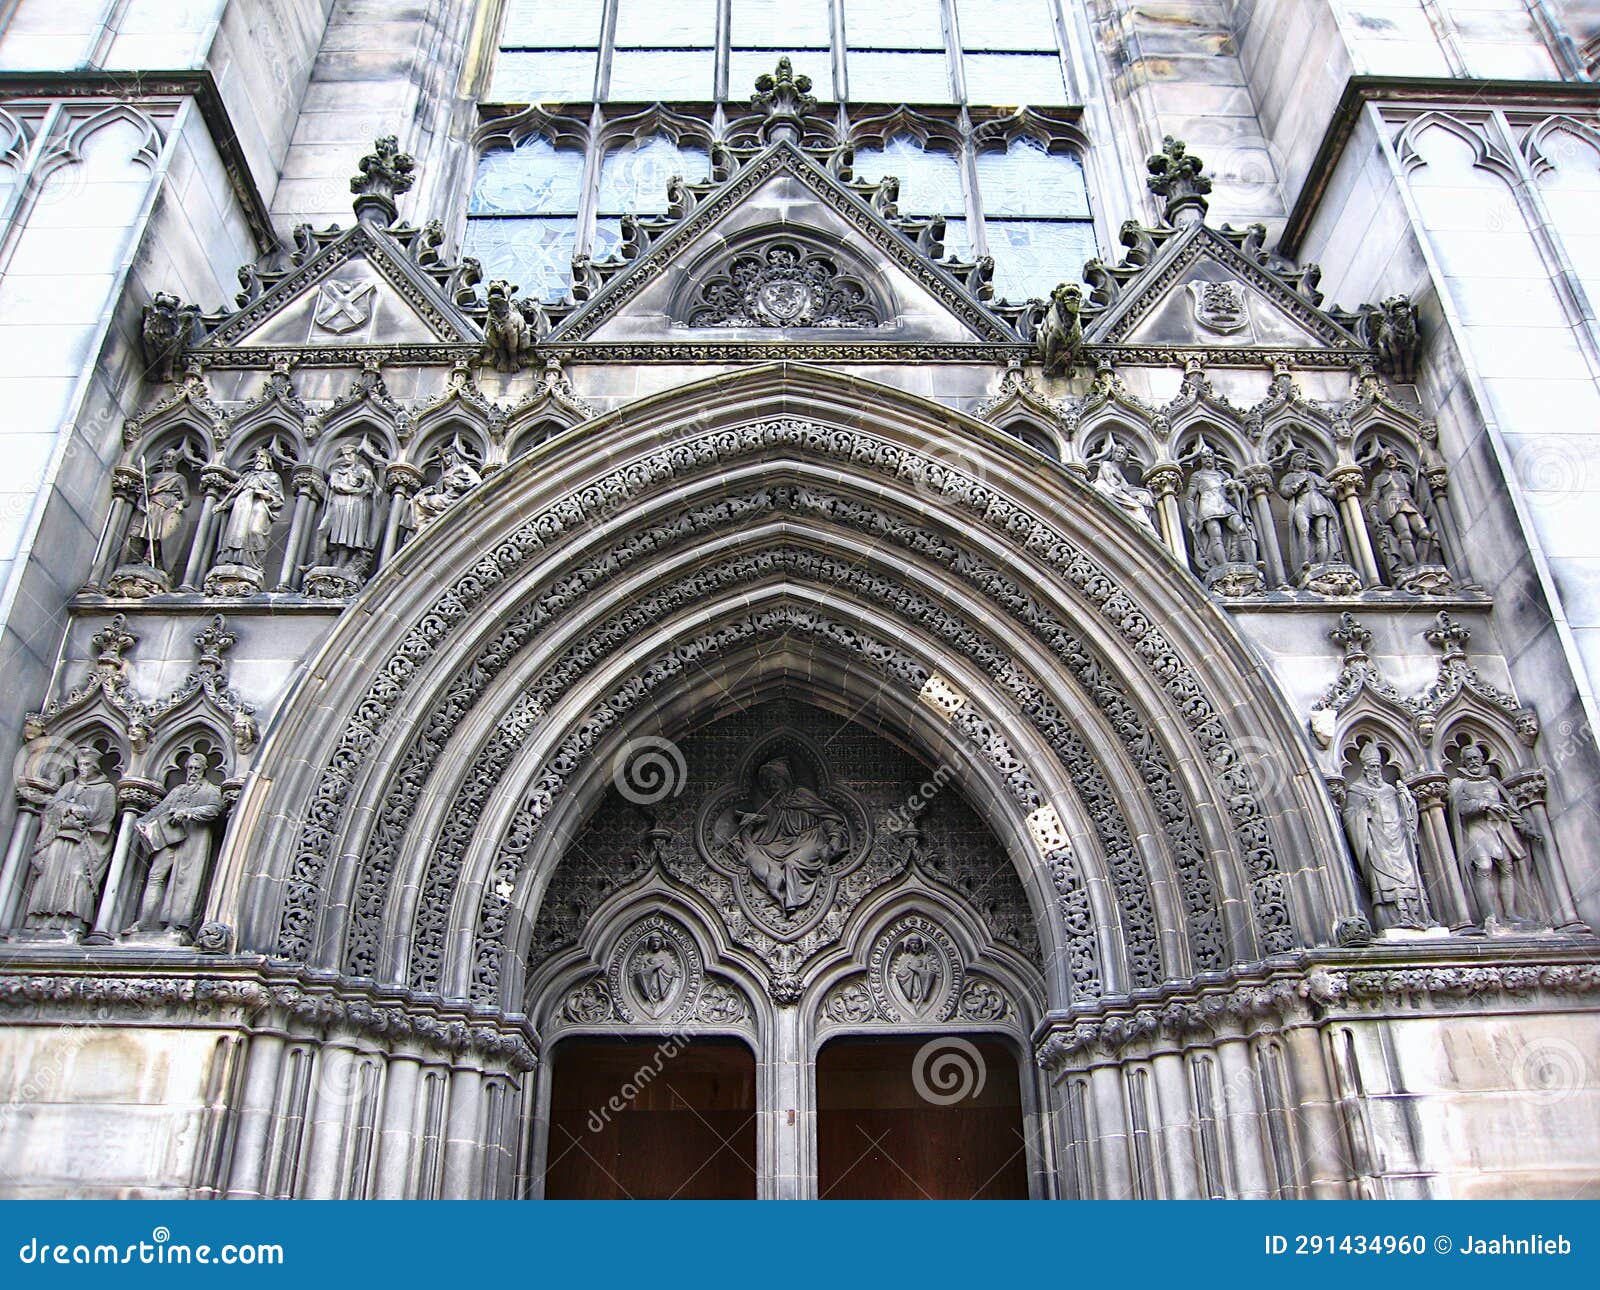 st. giles cathedral with details of gothic entrance, royal mile, edinburgh, scotland